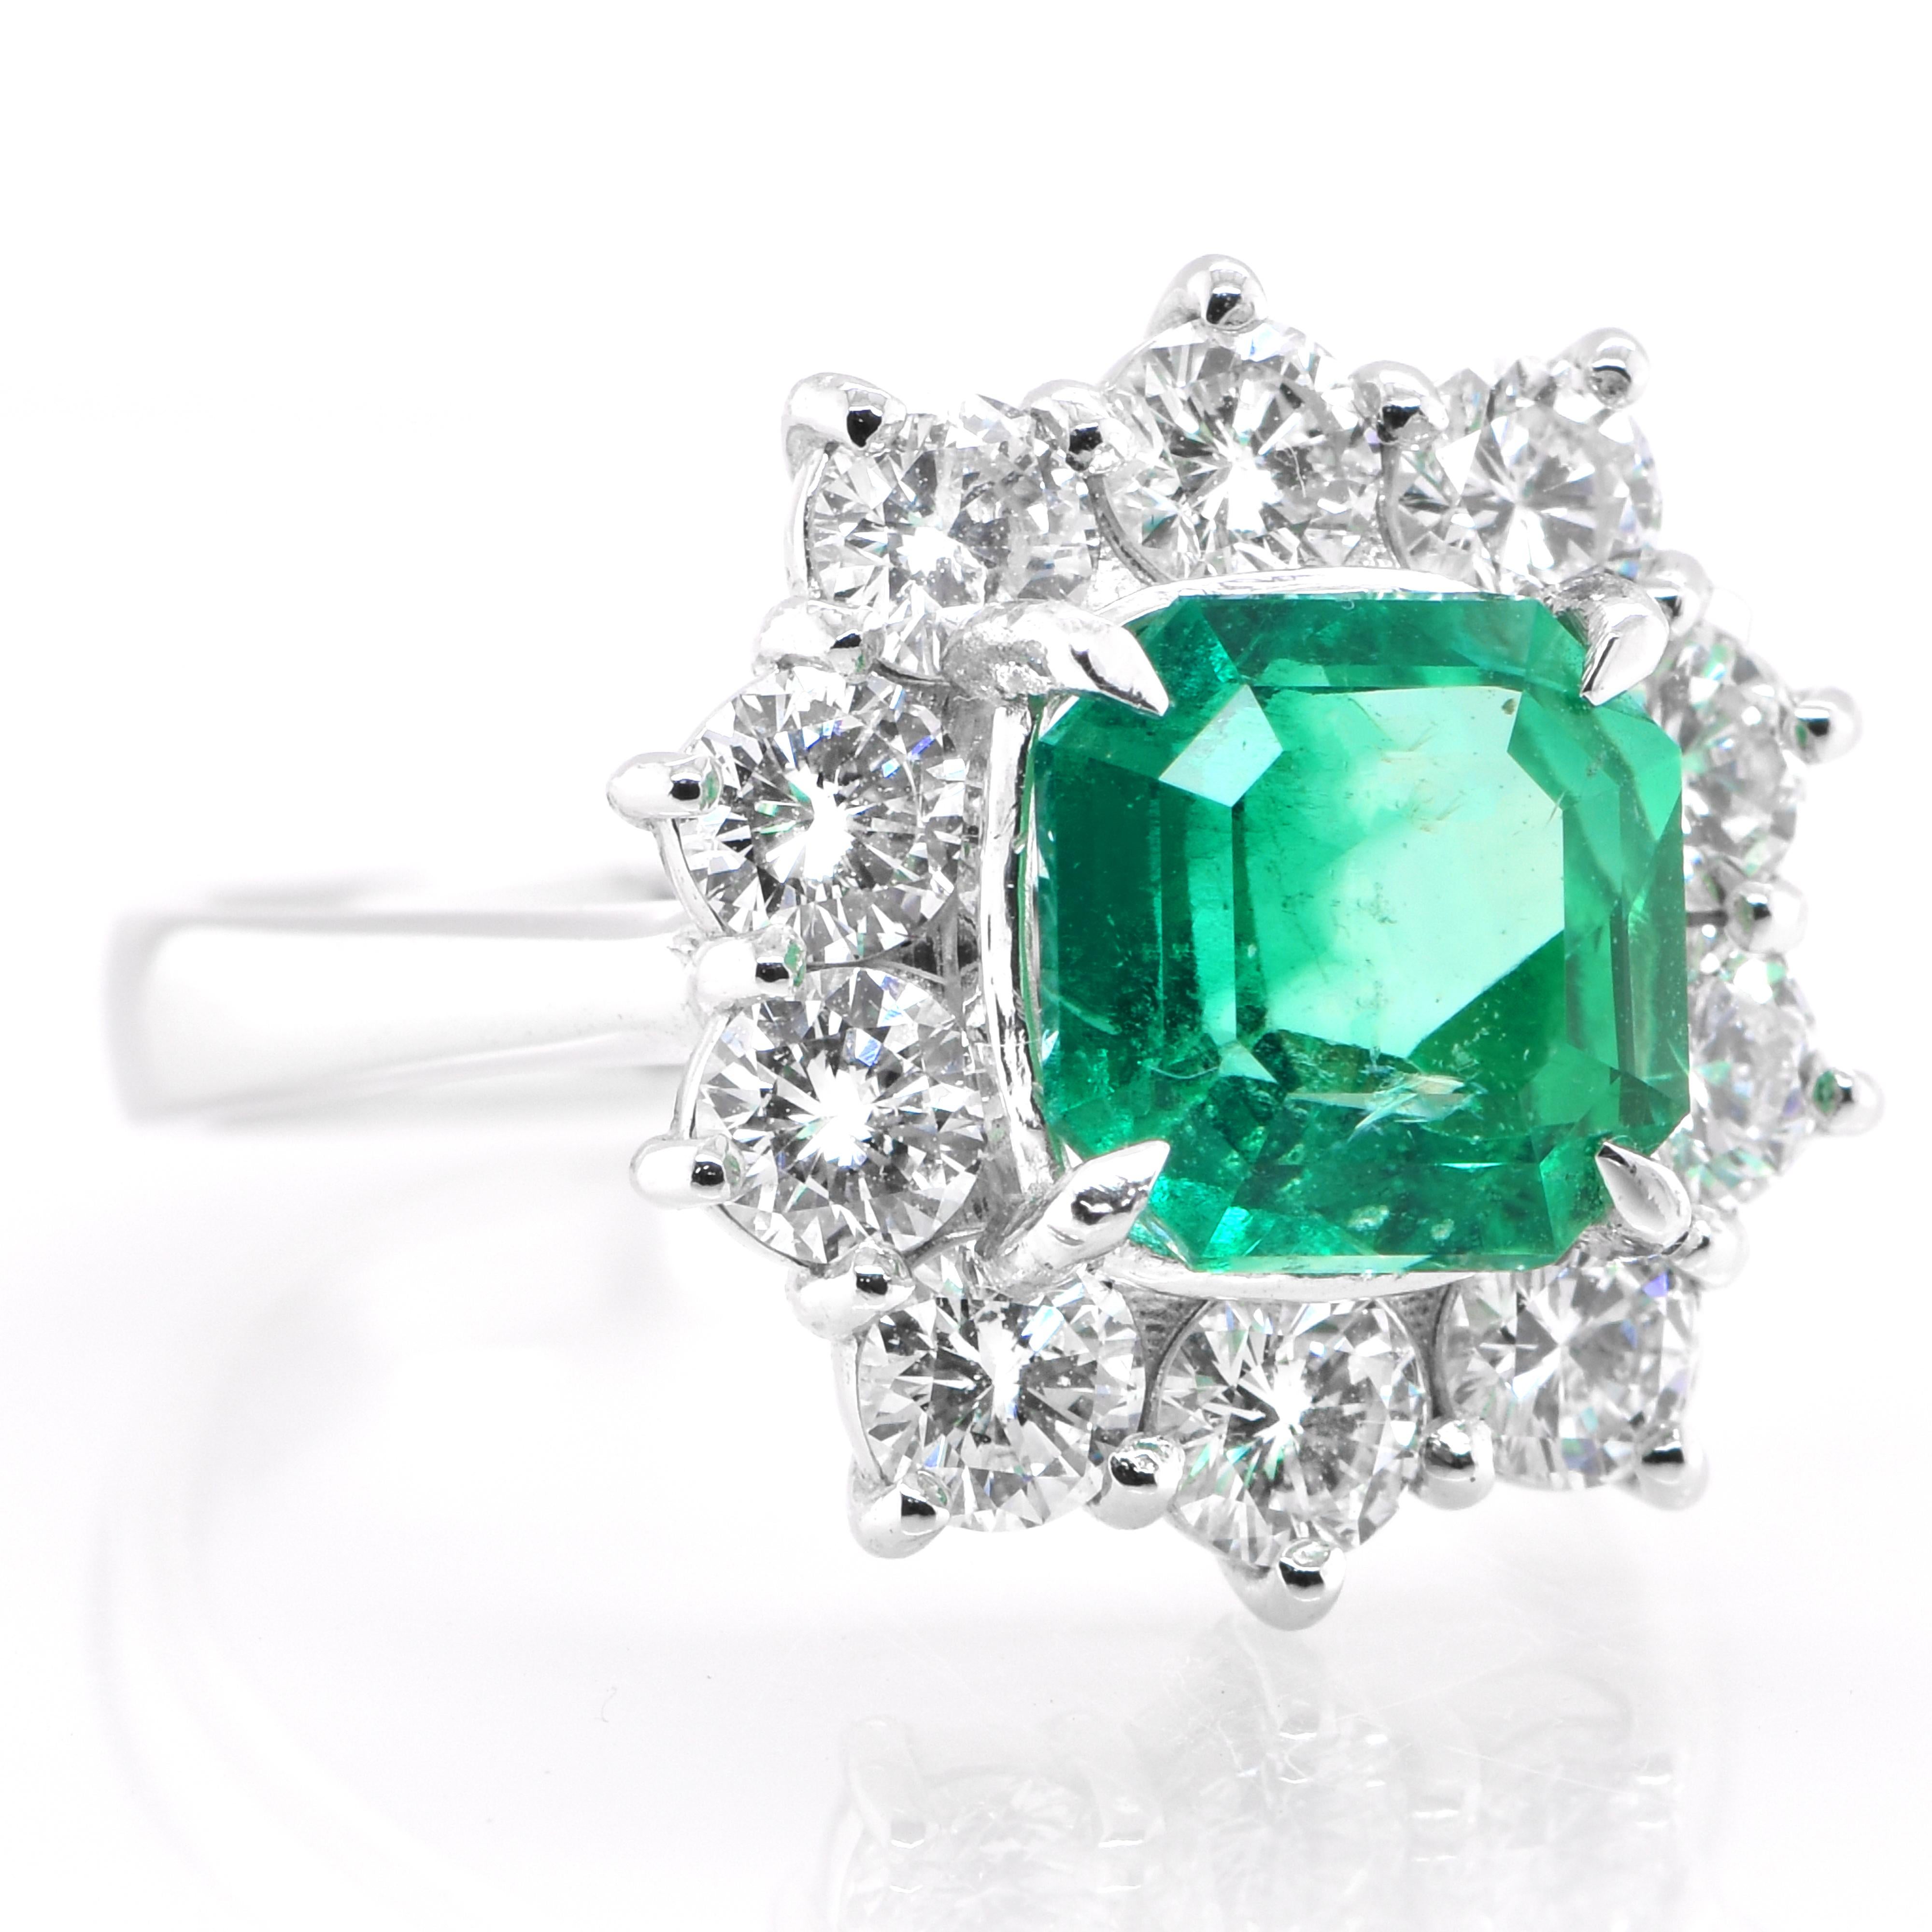 Modern GIA Certified 2.22 Carat Natural Colombian Emerald Ring Set in Platinum